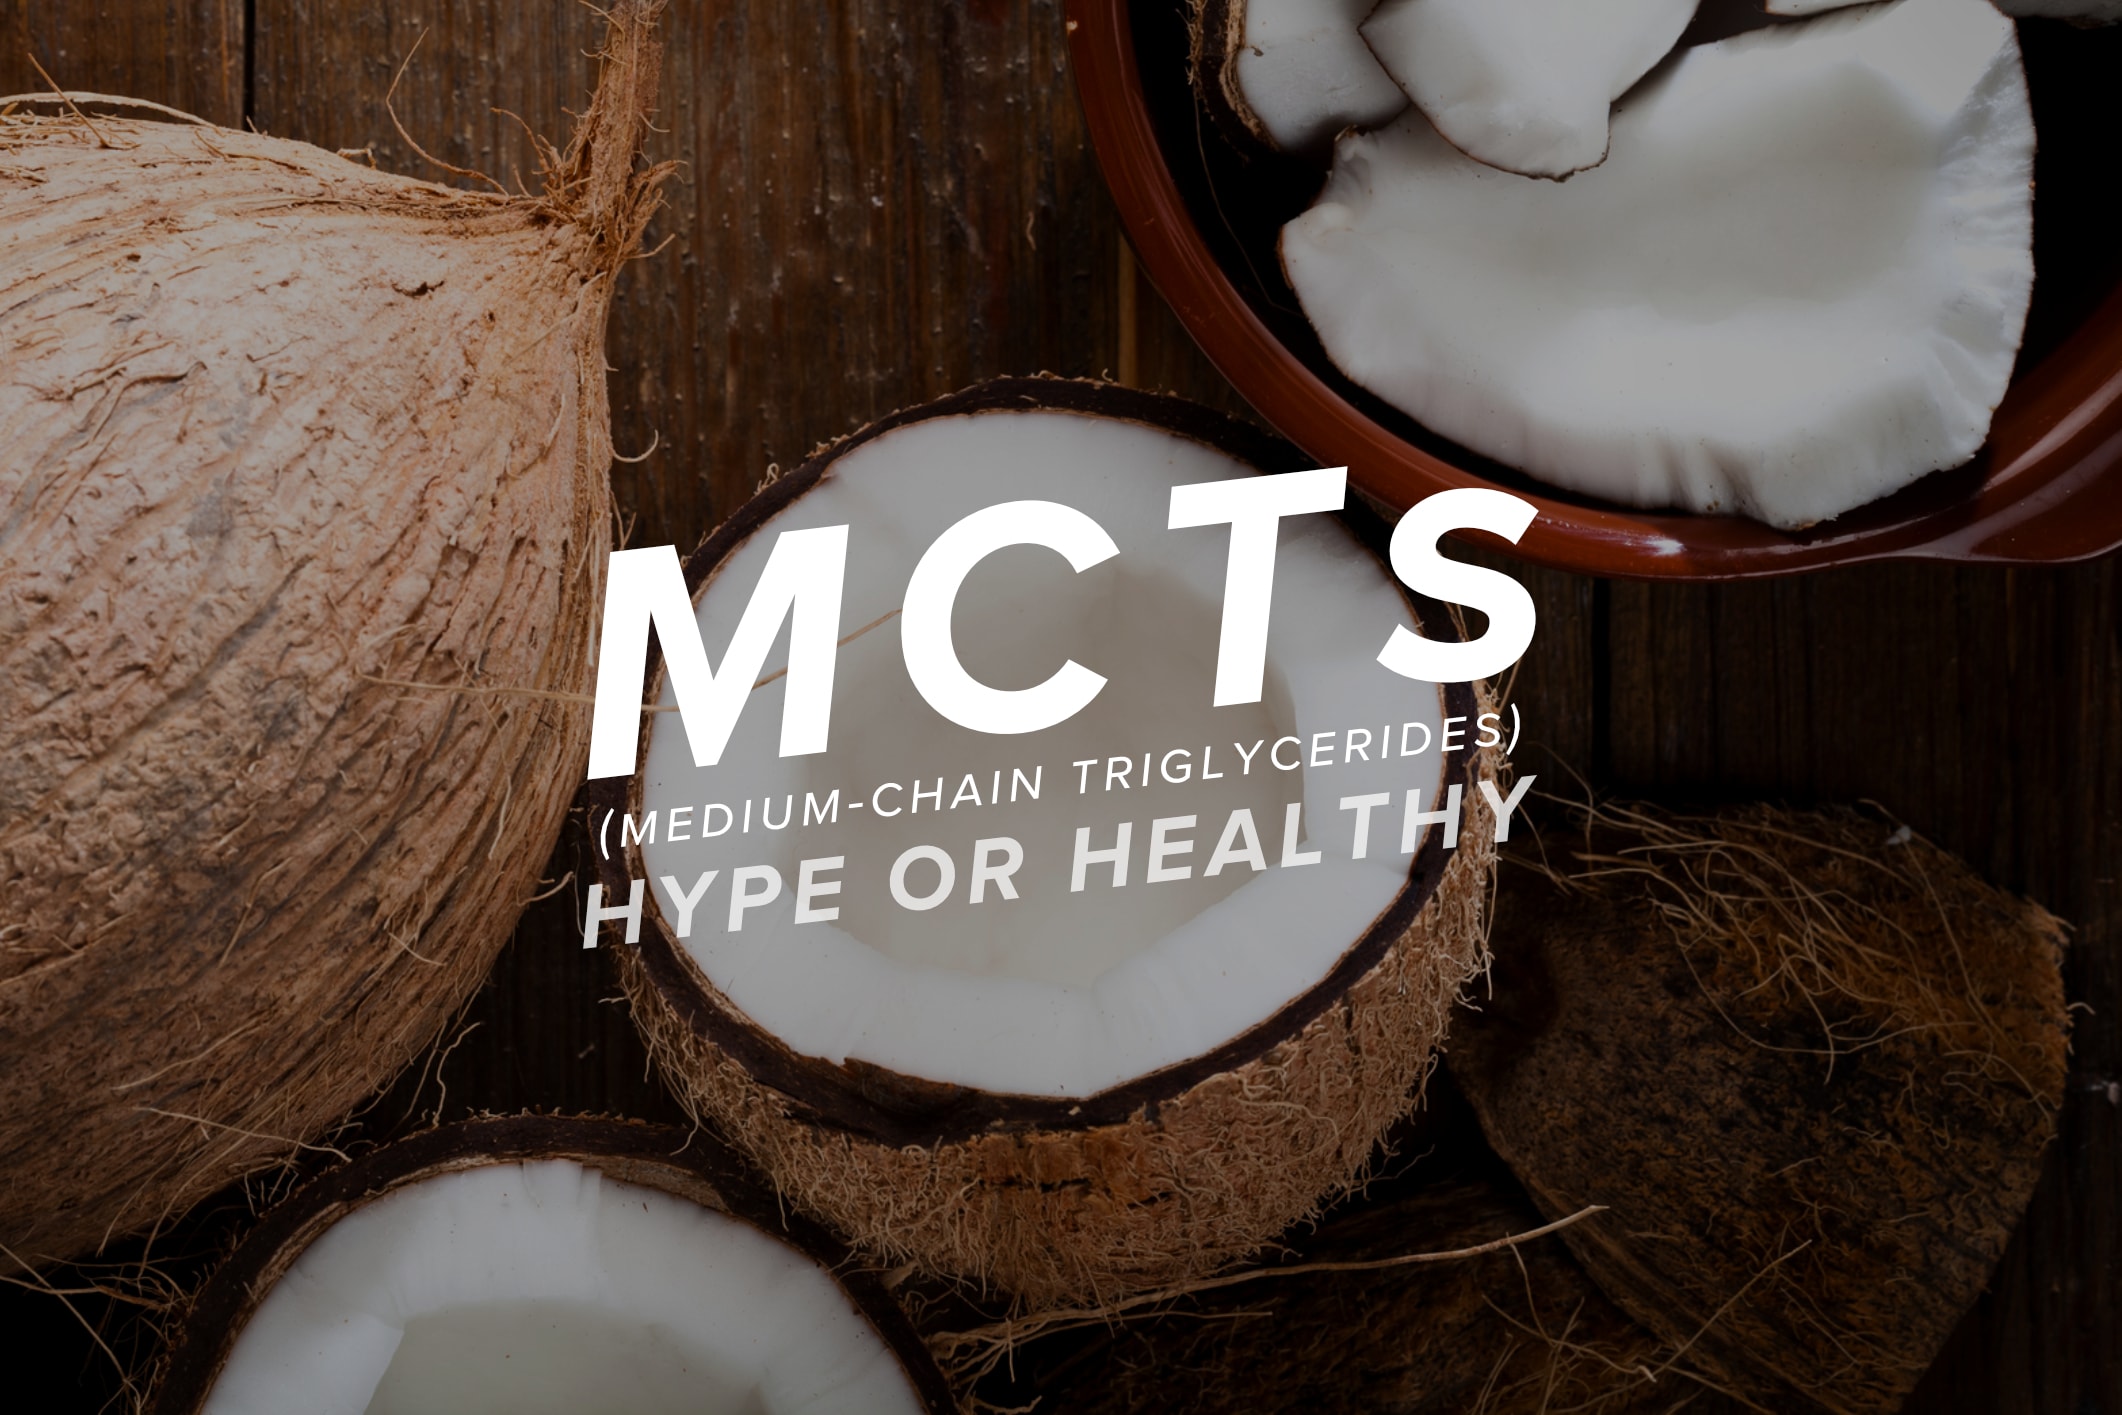 MCTs - Hype or Healthy?